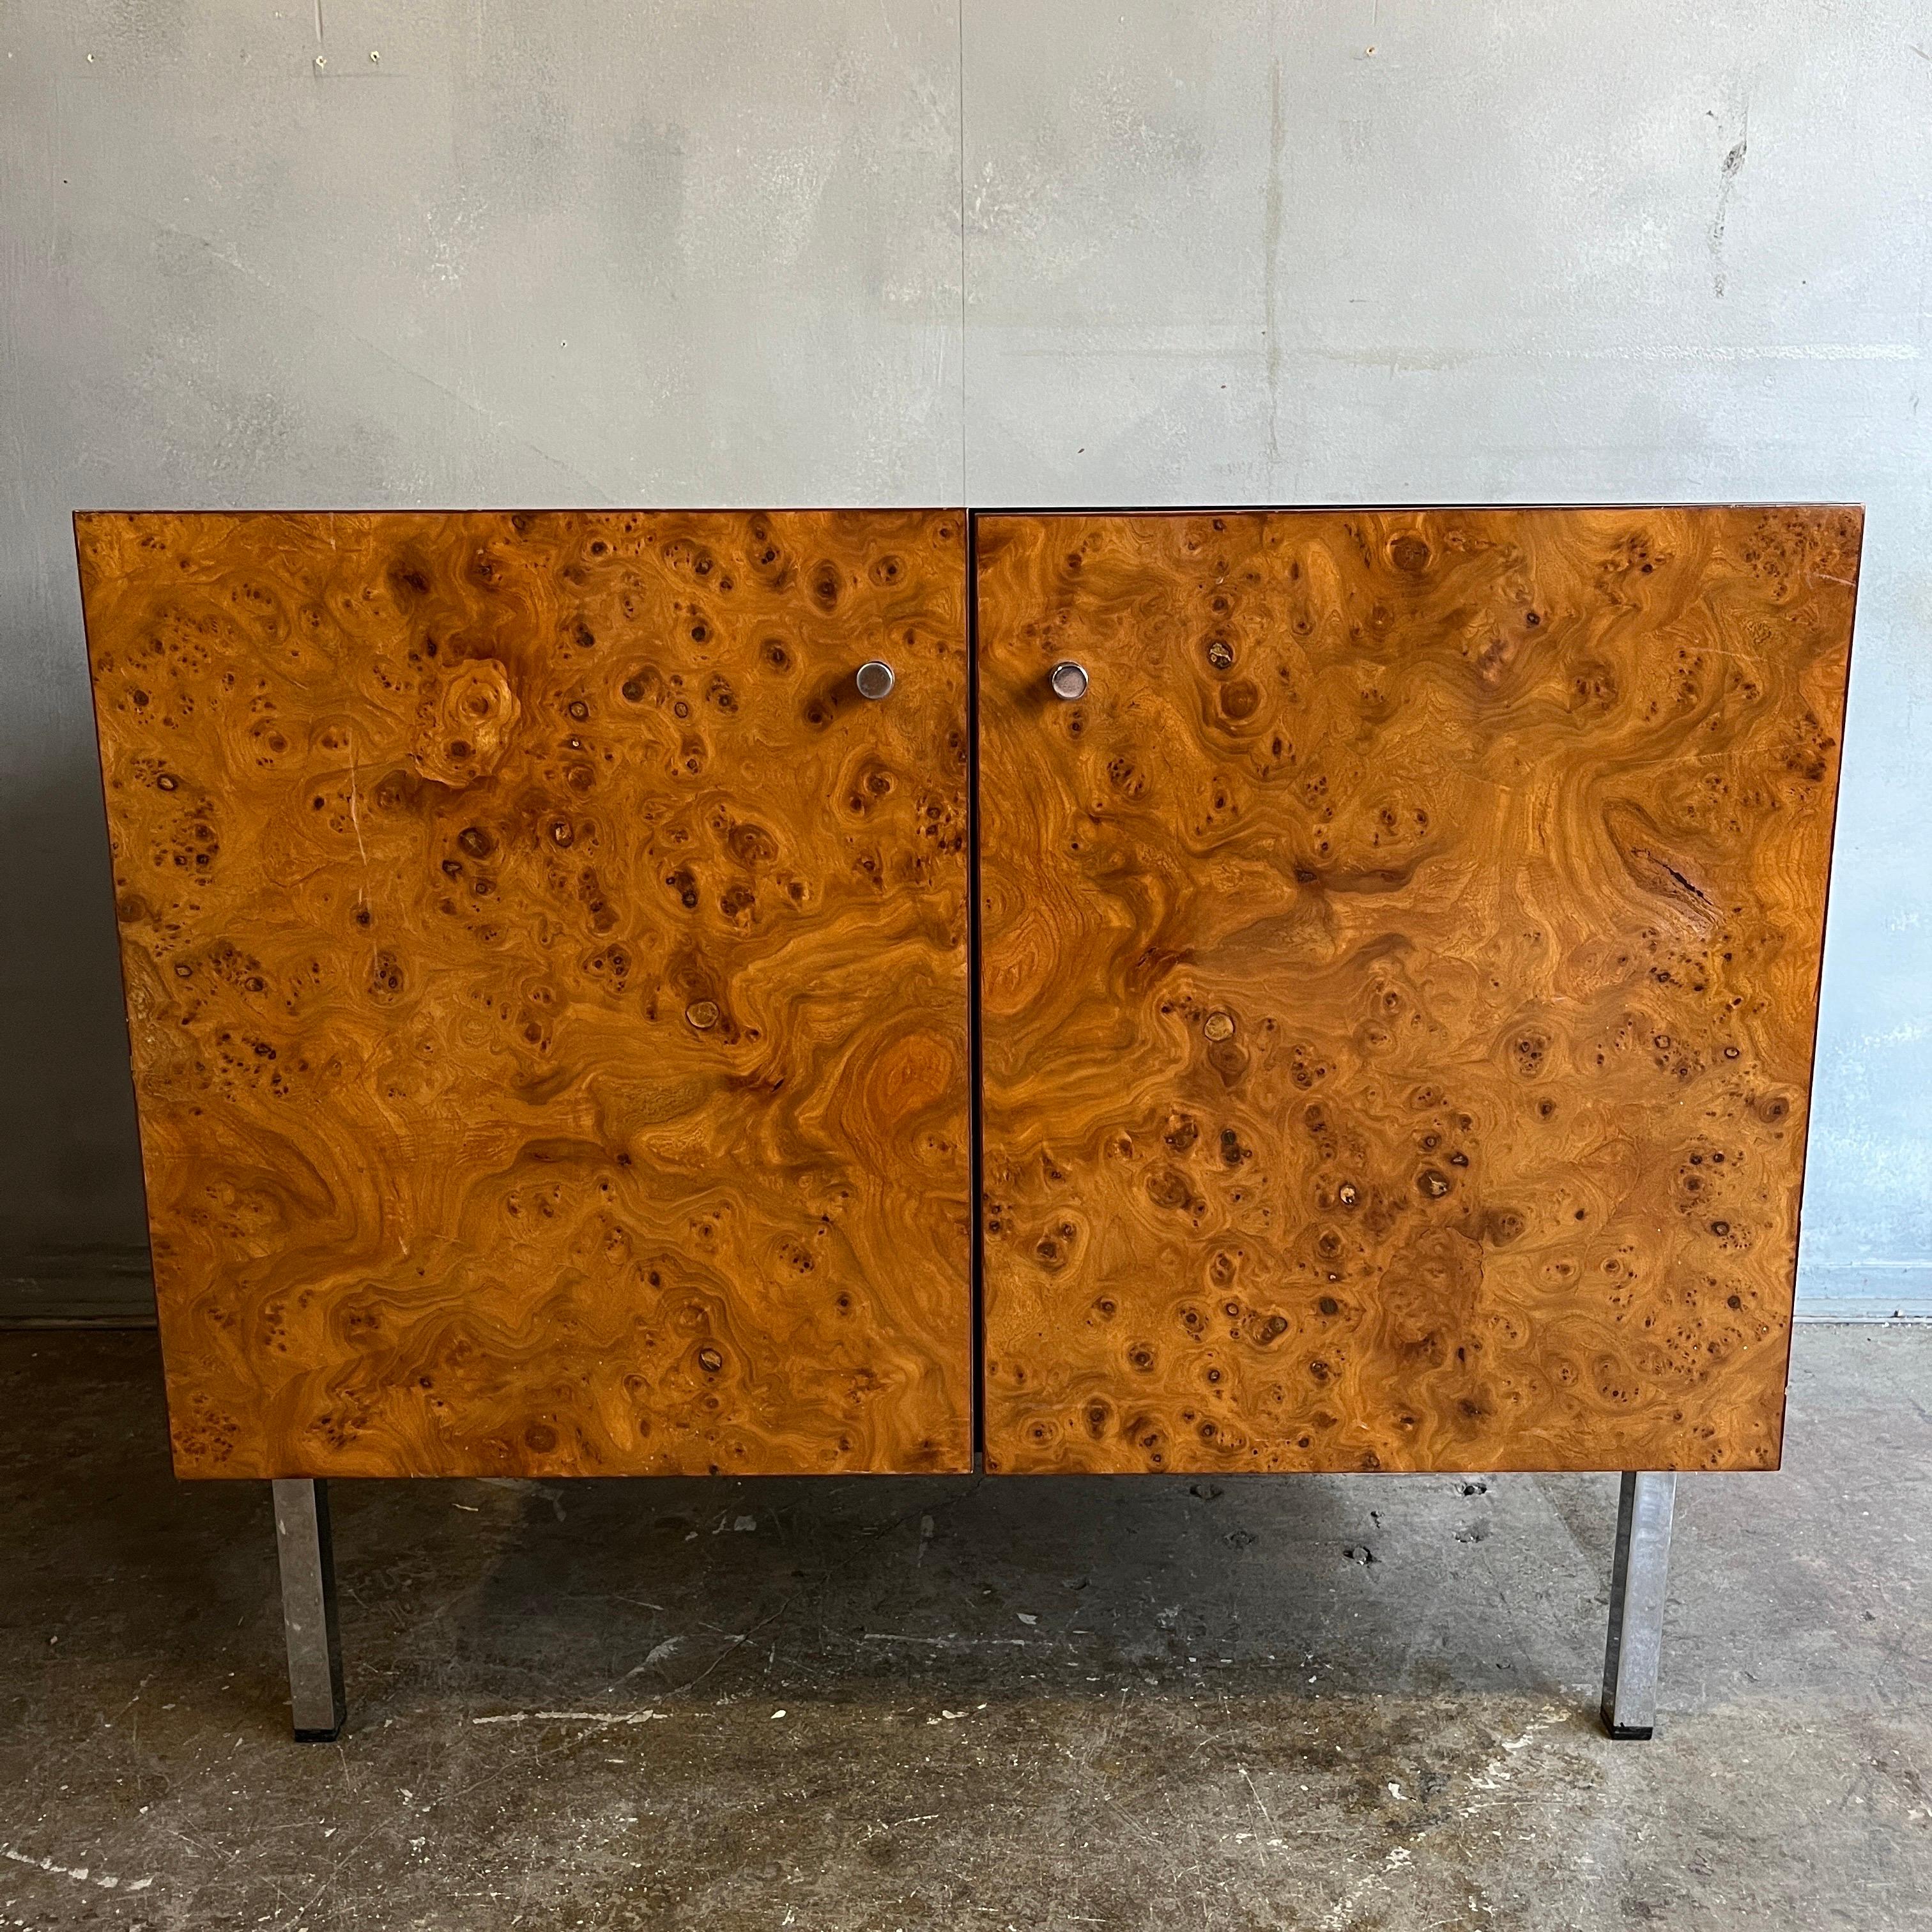 Petite midcentury cabinet or credenza with gorgeous highly figurative olive burl wood fronts resting on chromed square legs. Sides are in black lacquer. Inside reveals an adjustable shelf. Striking piece.